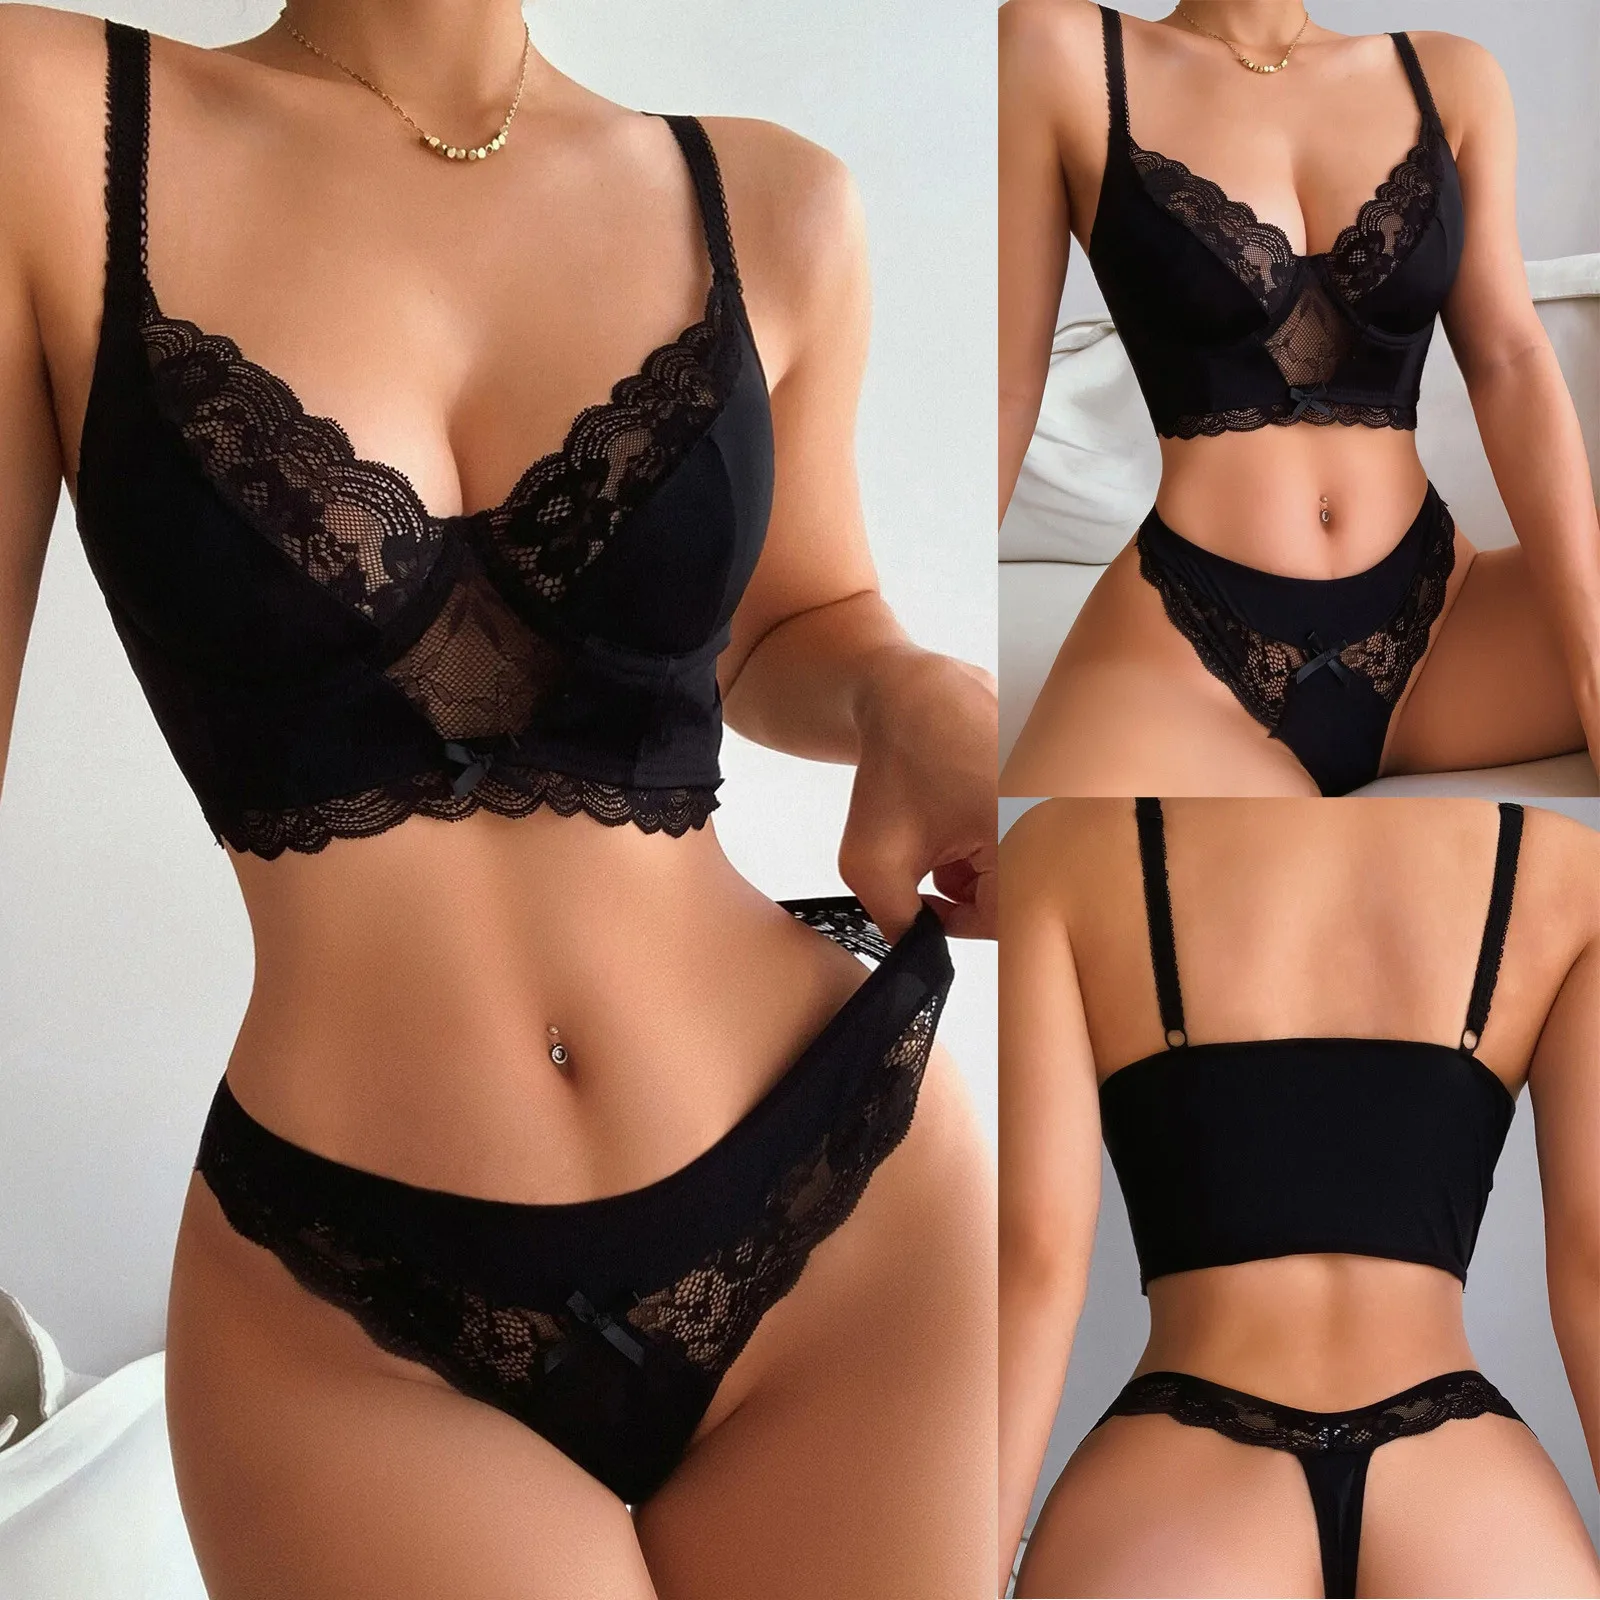 Ruffle Lace Lingerie Sexy Exotic Set Women's Underwear Transparent Short Skin Care Kits Sexy Lace Bra Brief Sets Erotic Intimate black lace underwear set